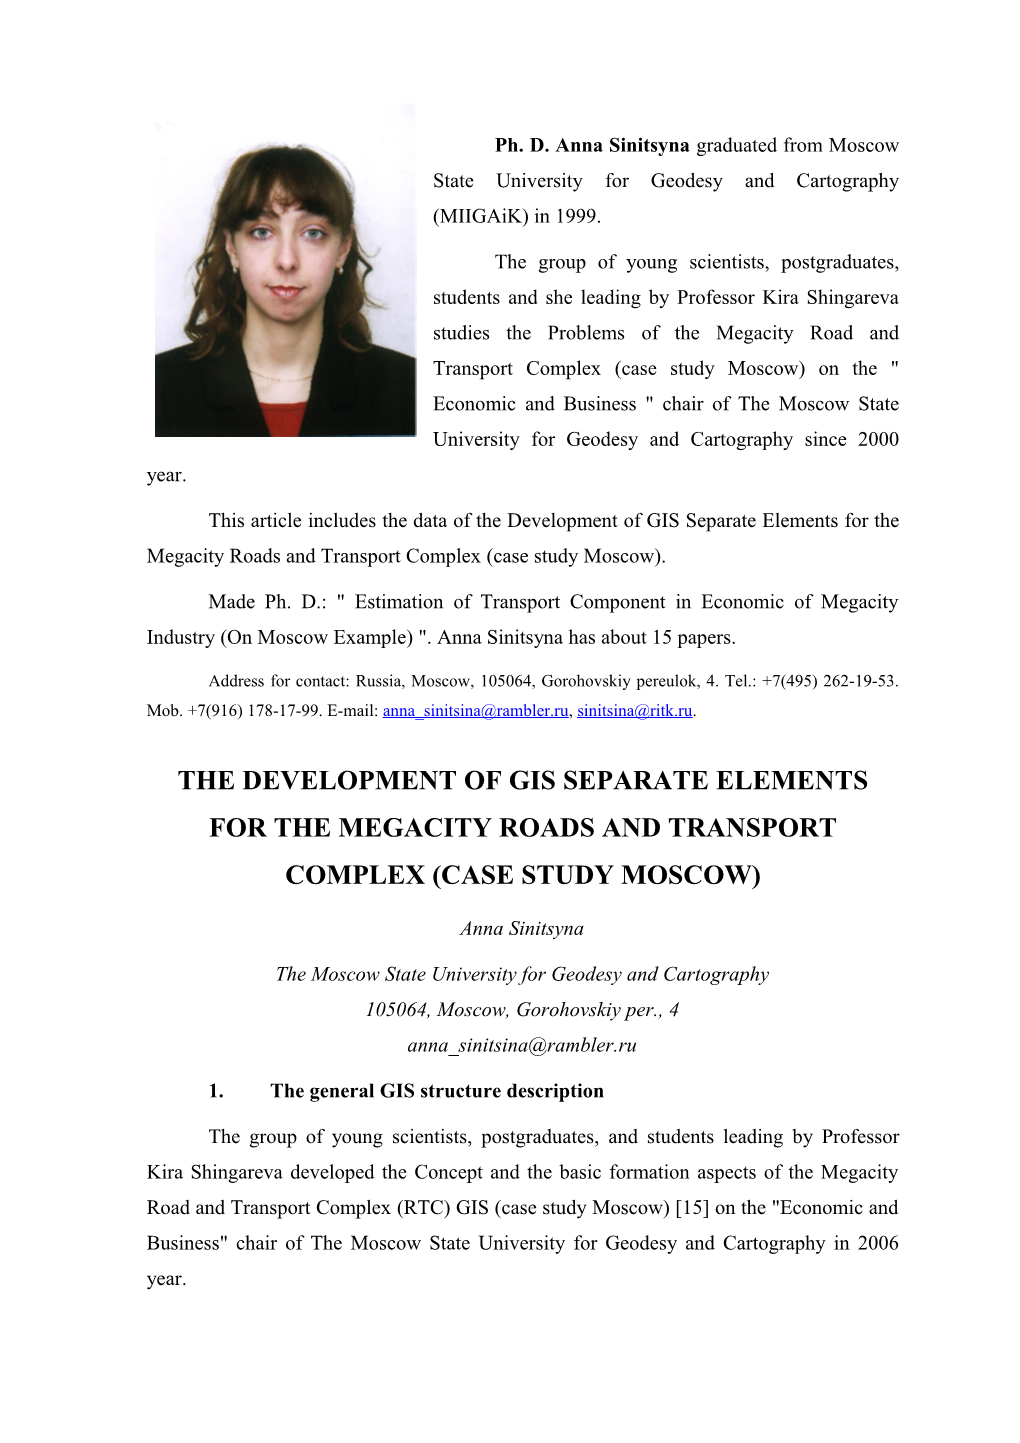 Ph. D. Anna Sinitsyna Graduated from Moscowstateuniversity for Geodesy and Cartography